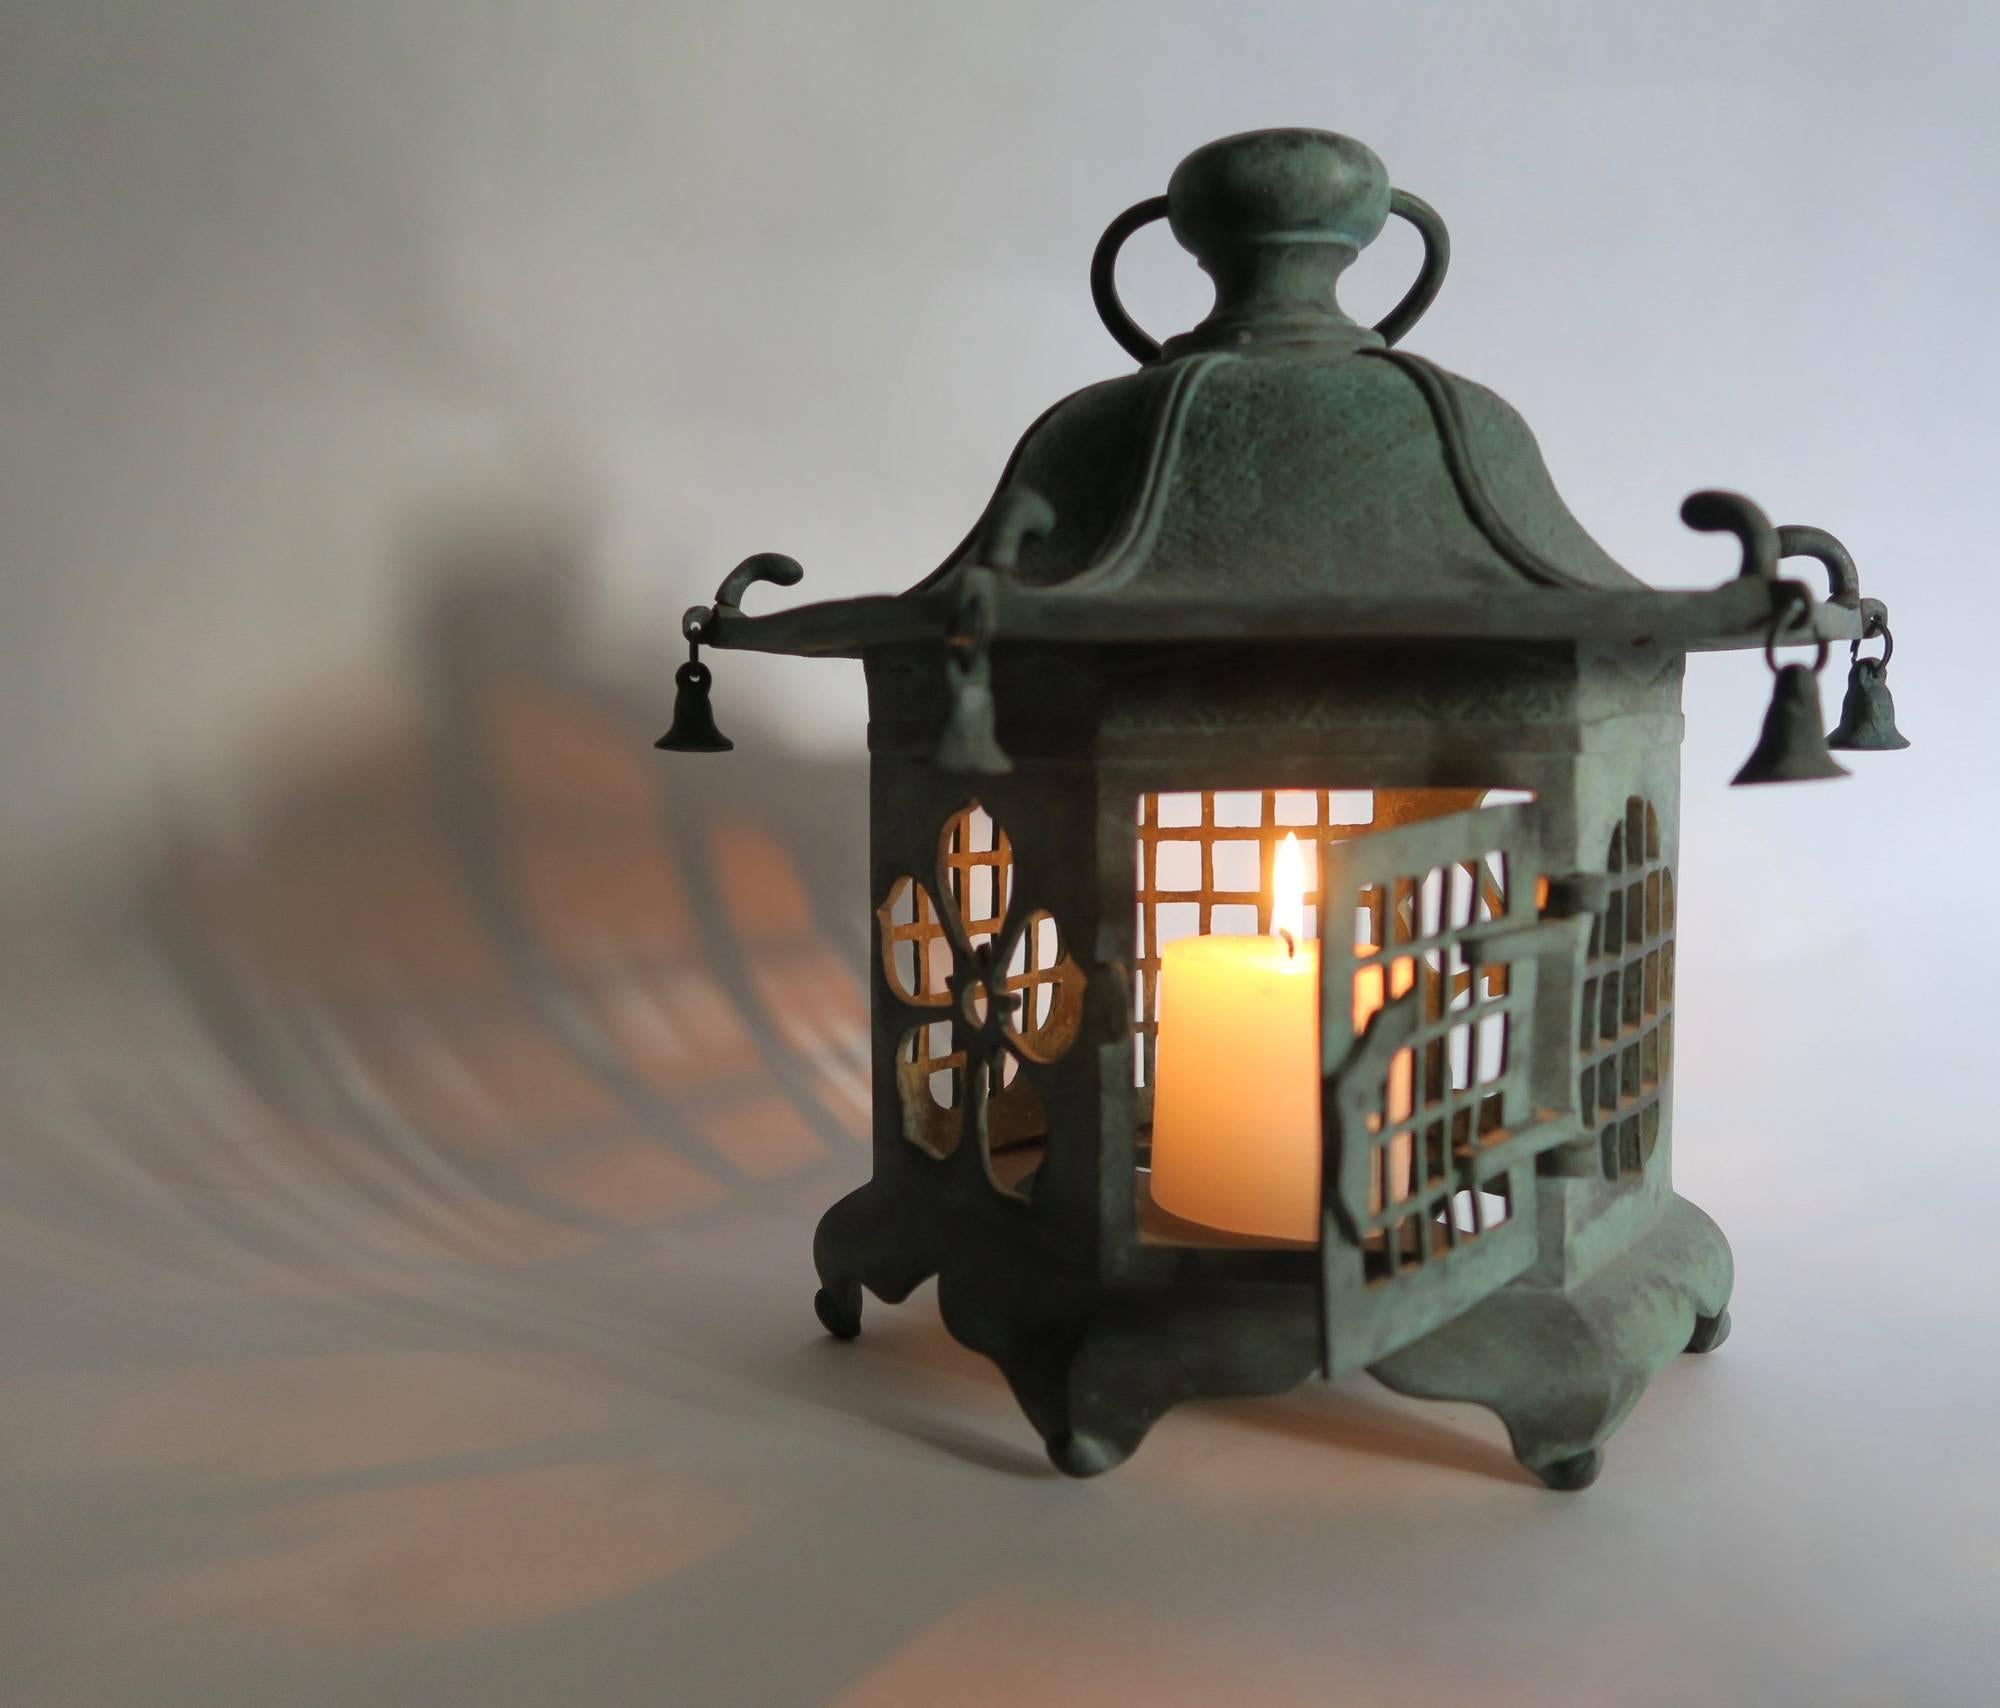 Heavy bronze hexagonal pagoda lantern with beautiful patinated verdigris finish
Japan, circa 1920
Weight 5 Kg
Looks great inside a home interior as well as placed outside on a terrace or in a garden
Has a suspension buckle and hole for